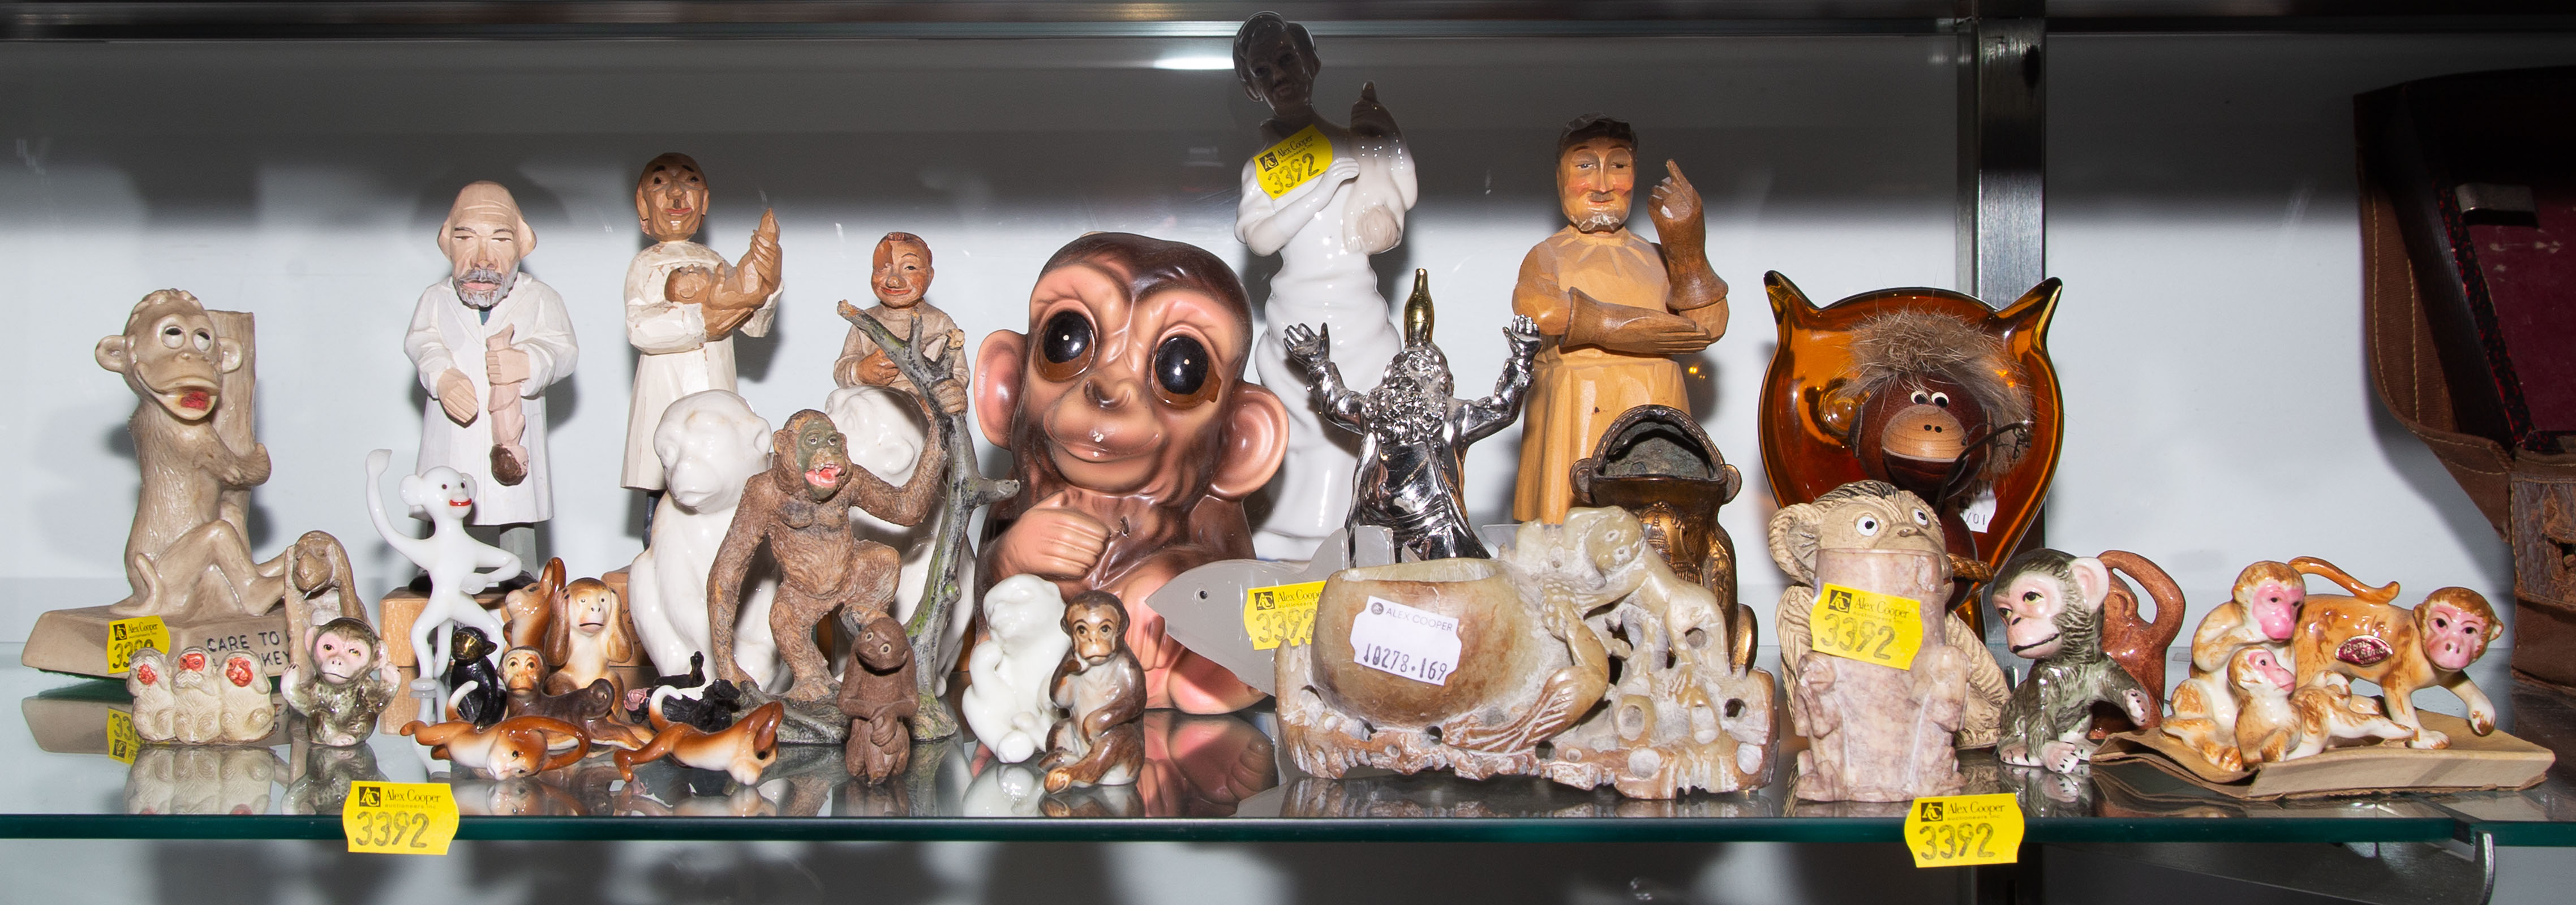 LARGE GROUP OF MONKEY & PHYSICIAN FIGURES